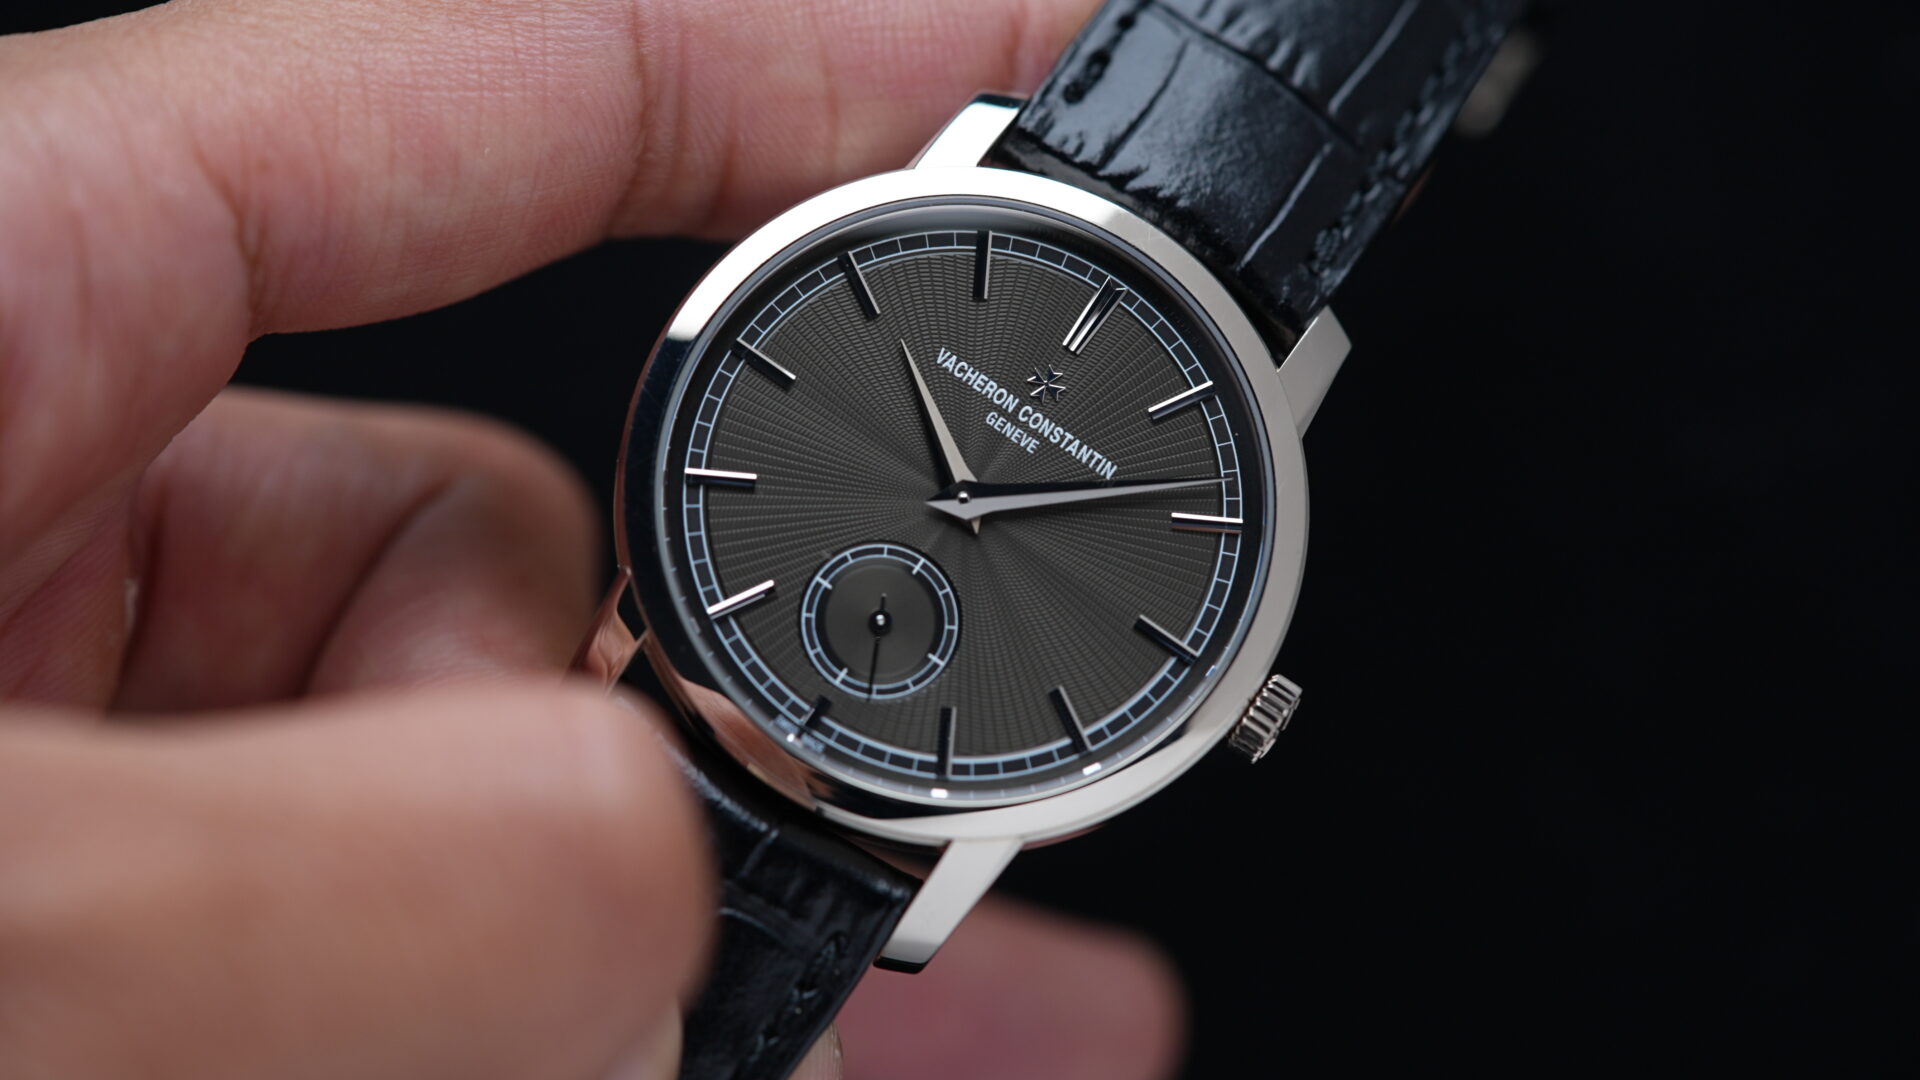 Vacheron Constantin Patrimony Traditional Japan 100th Anniversary watch displayed in hand.